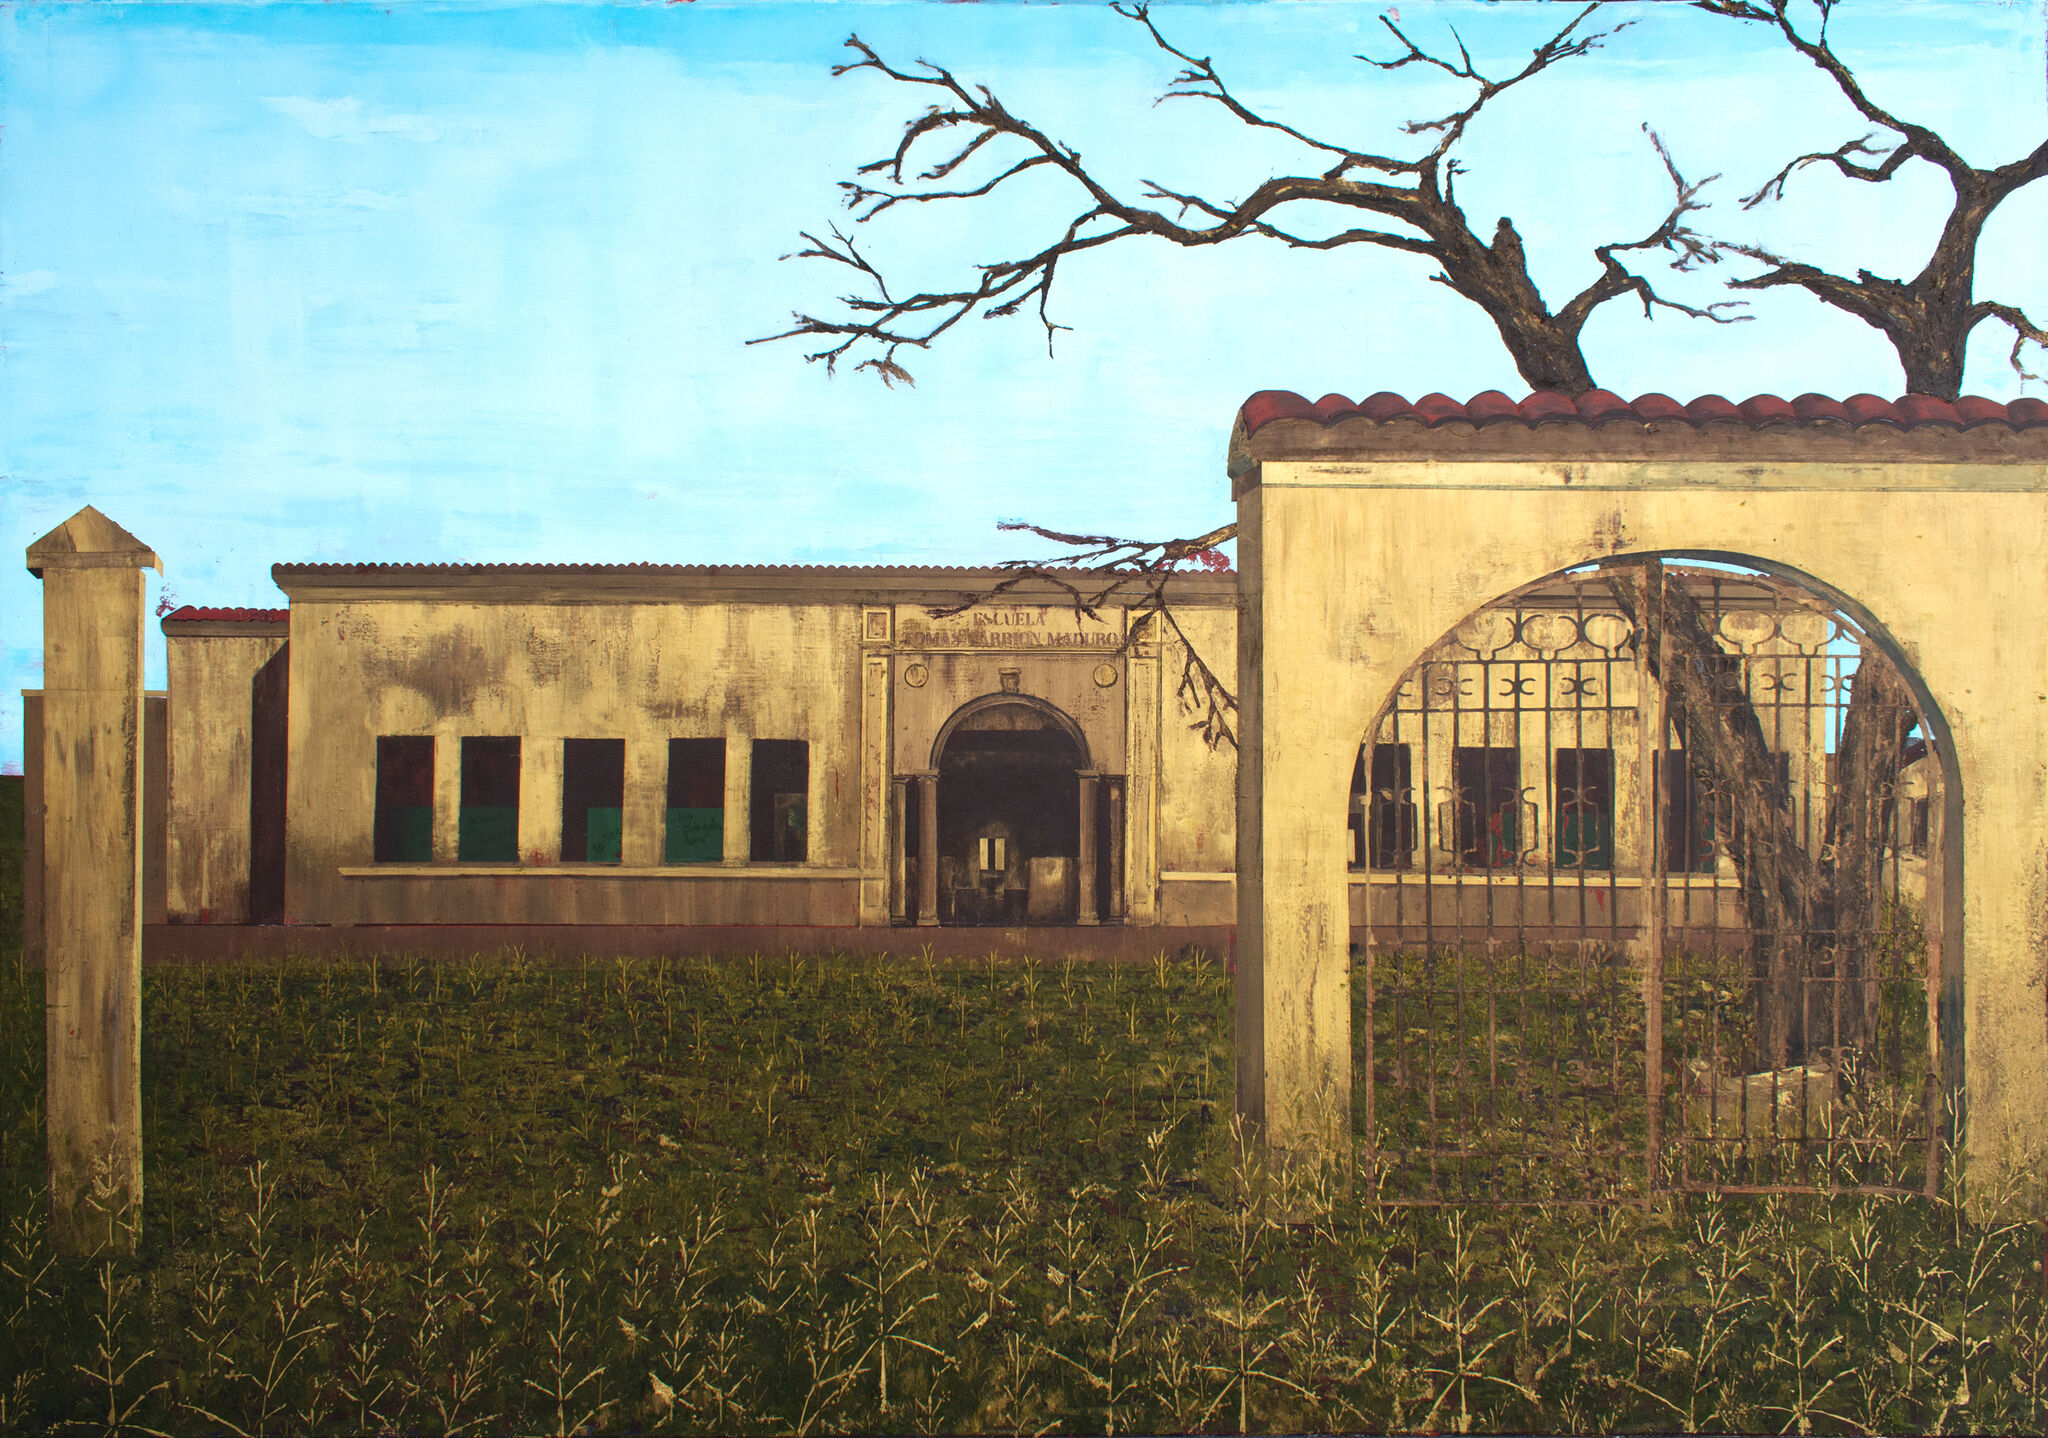 A weatherworn building with grass and a barren tree. 